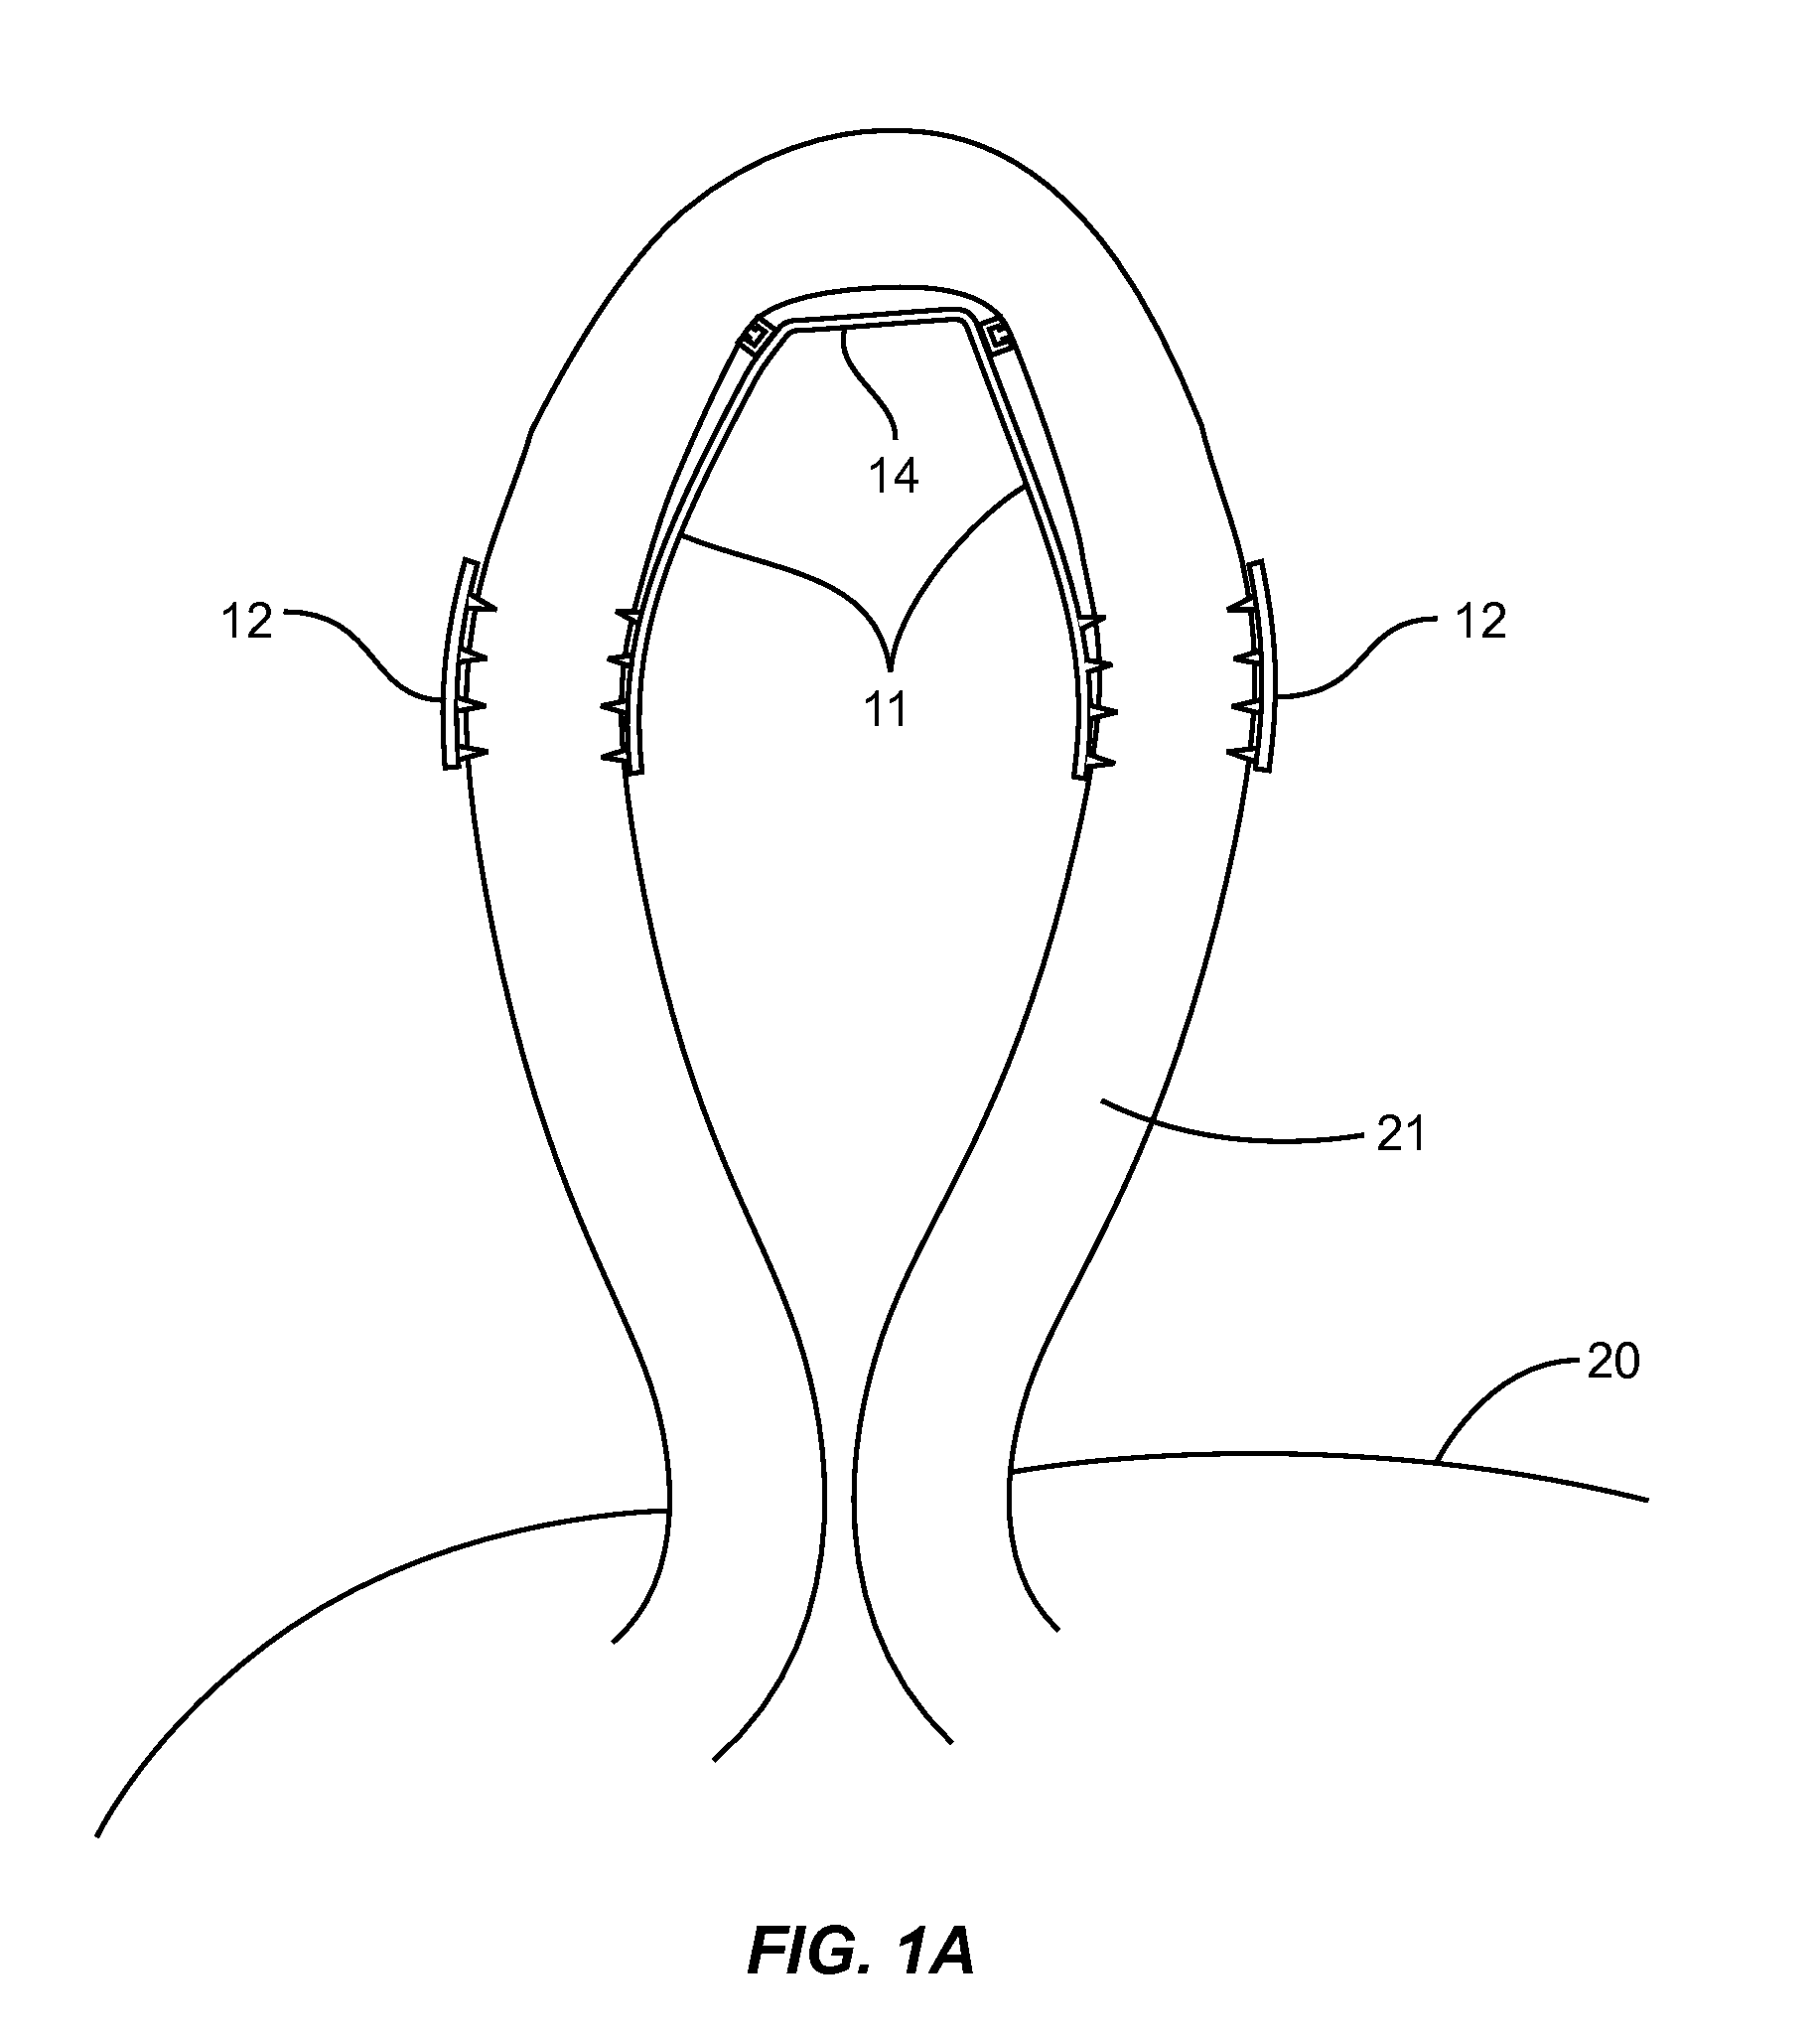 Vas deferens vasectomy capping device